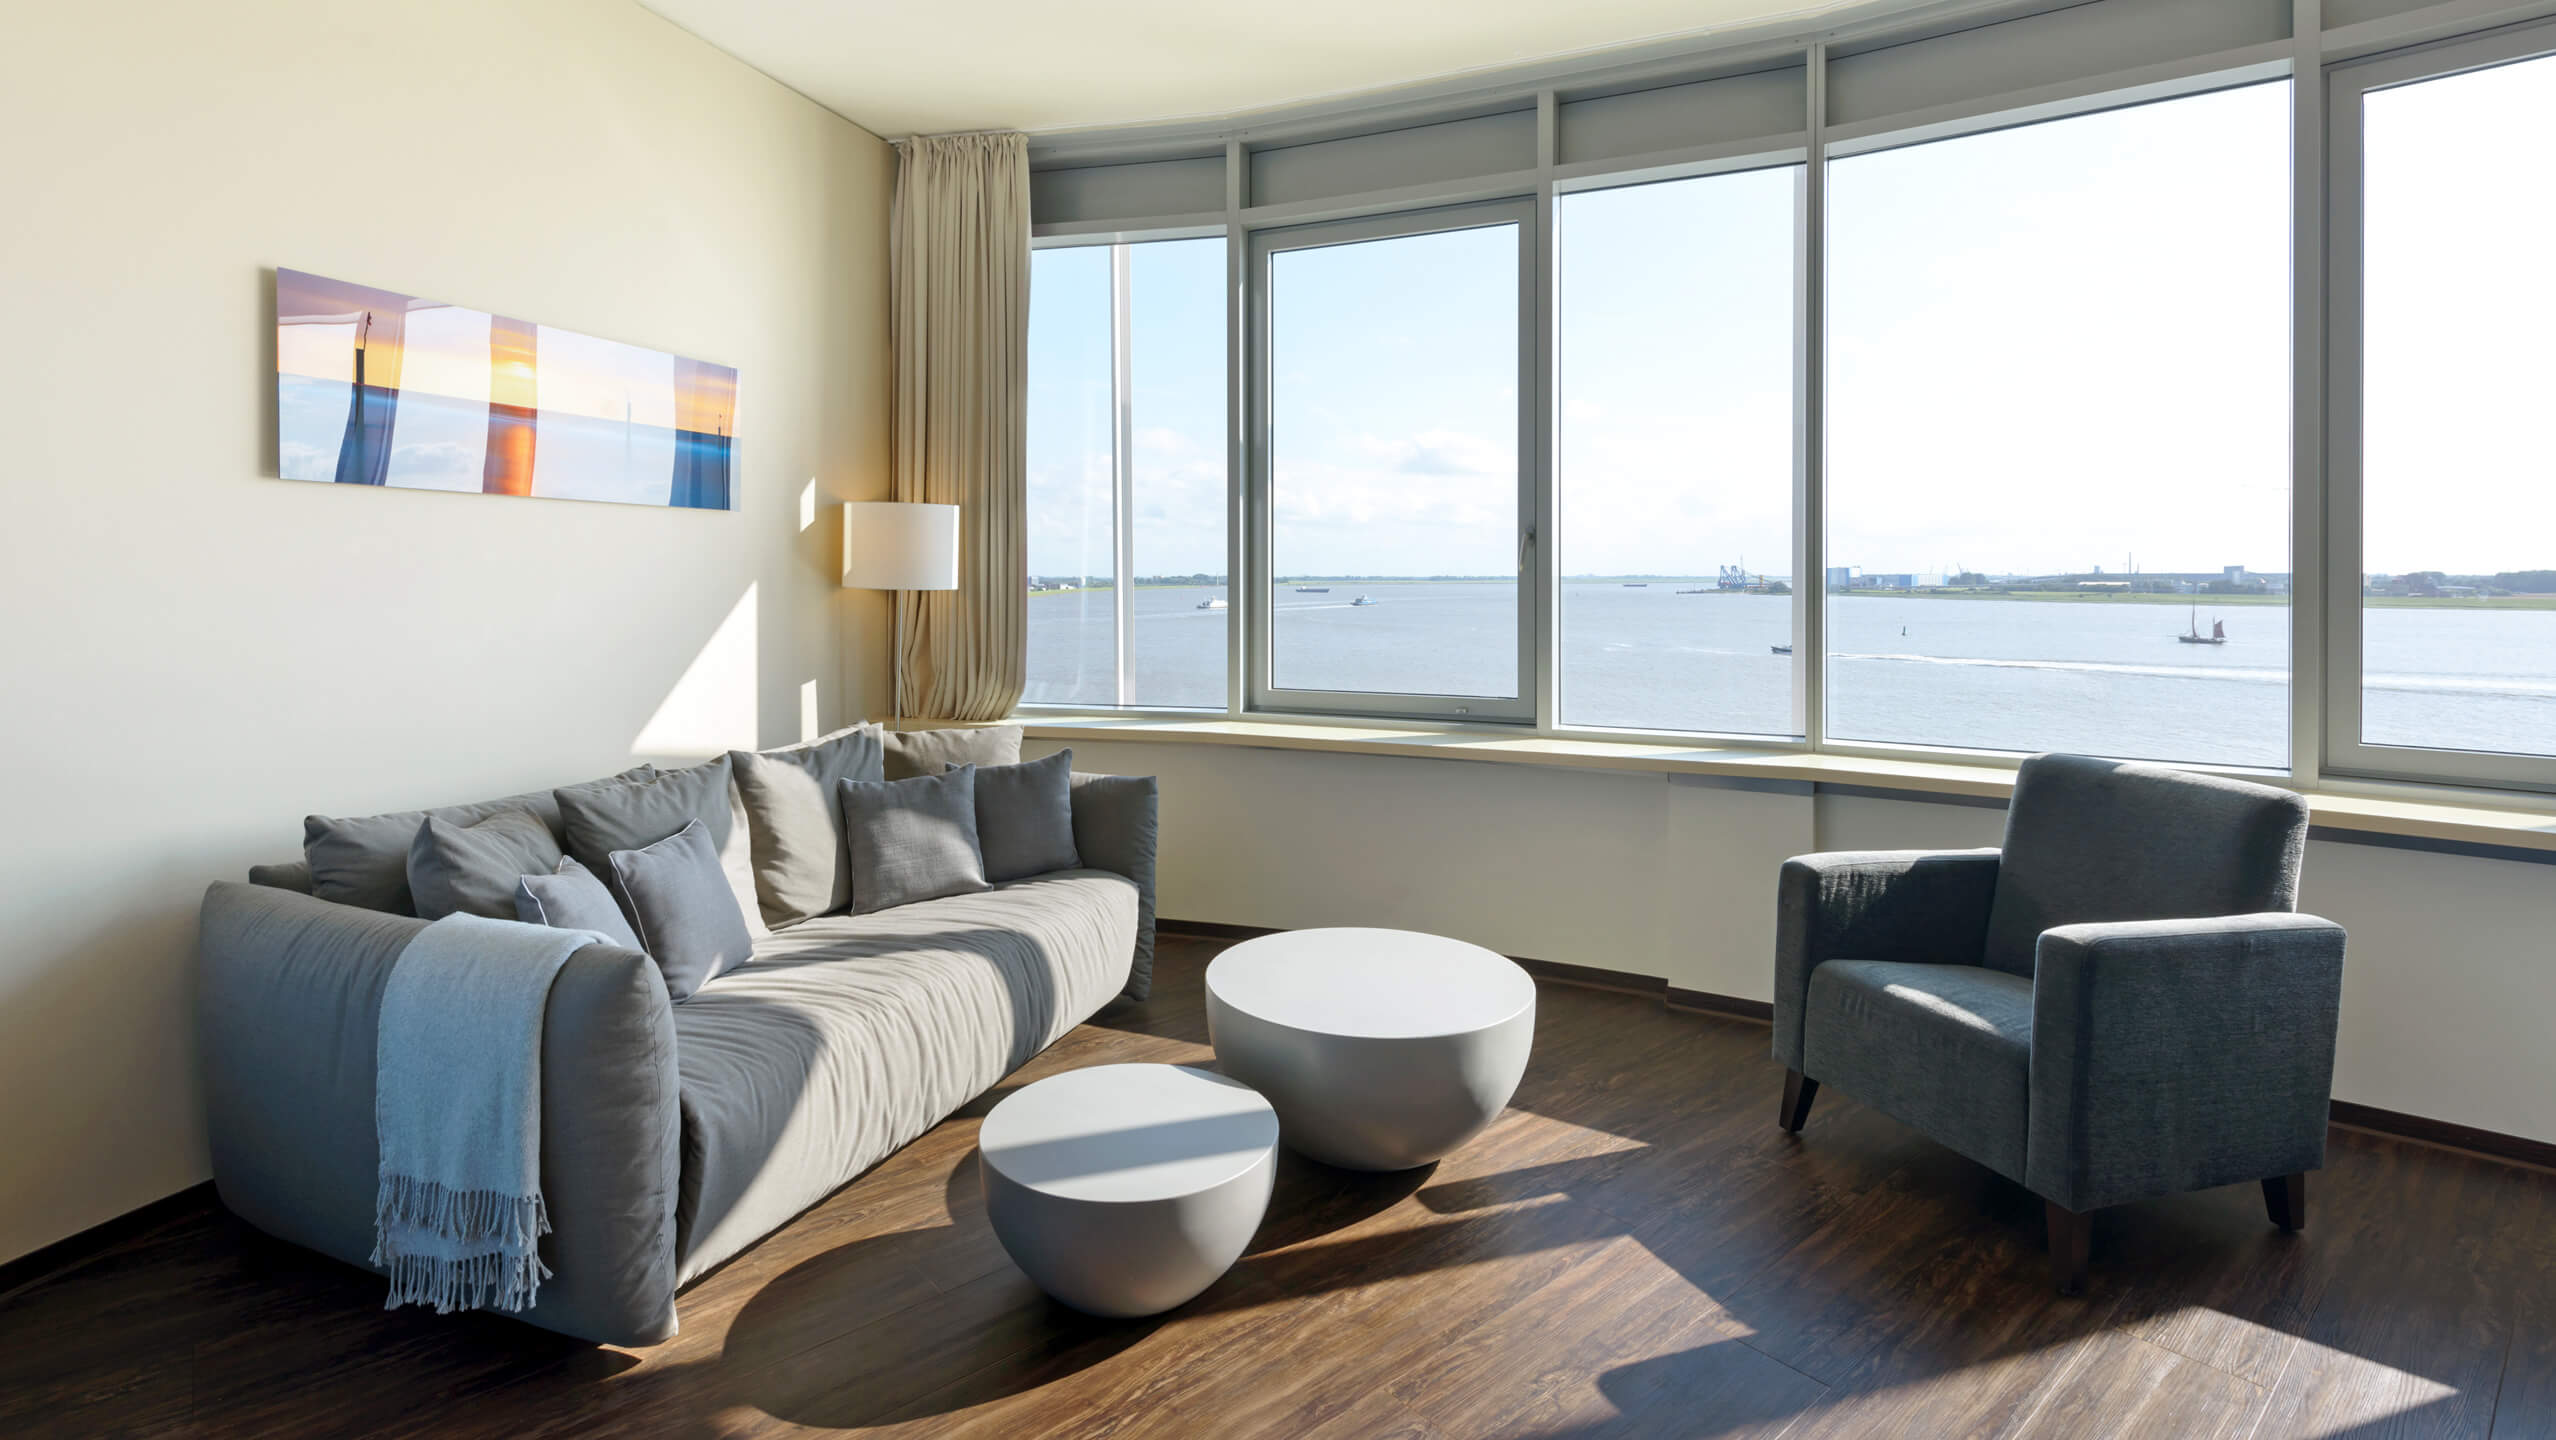 Interior view of the Suite in the ATLANTIC Hotel SAIL City in Bremerhaven with an amazing view over the Weser